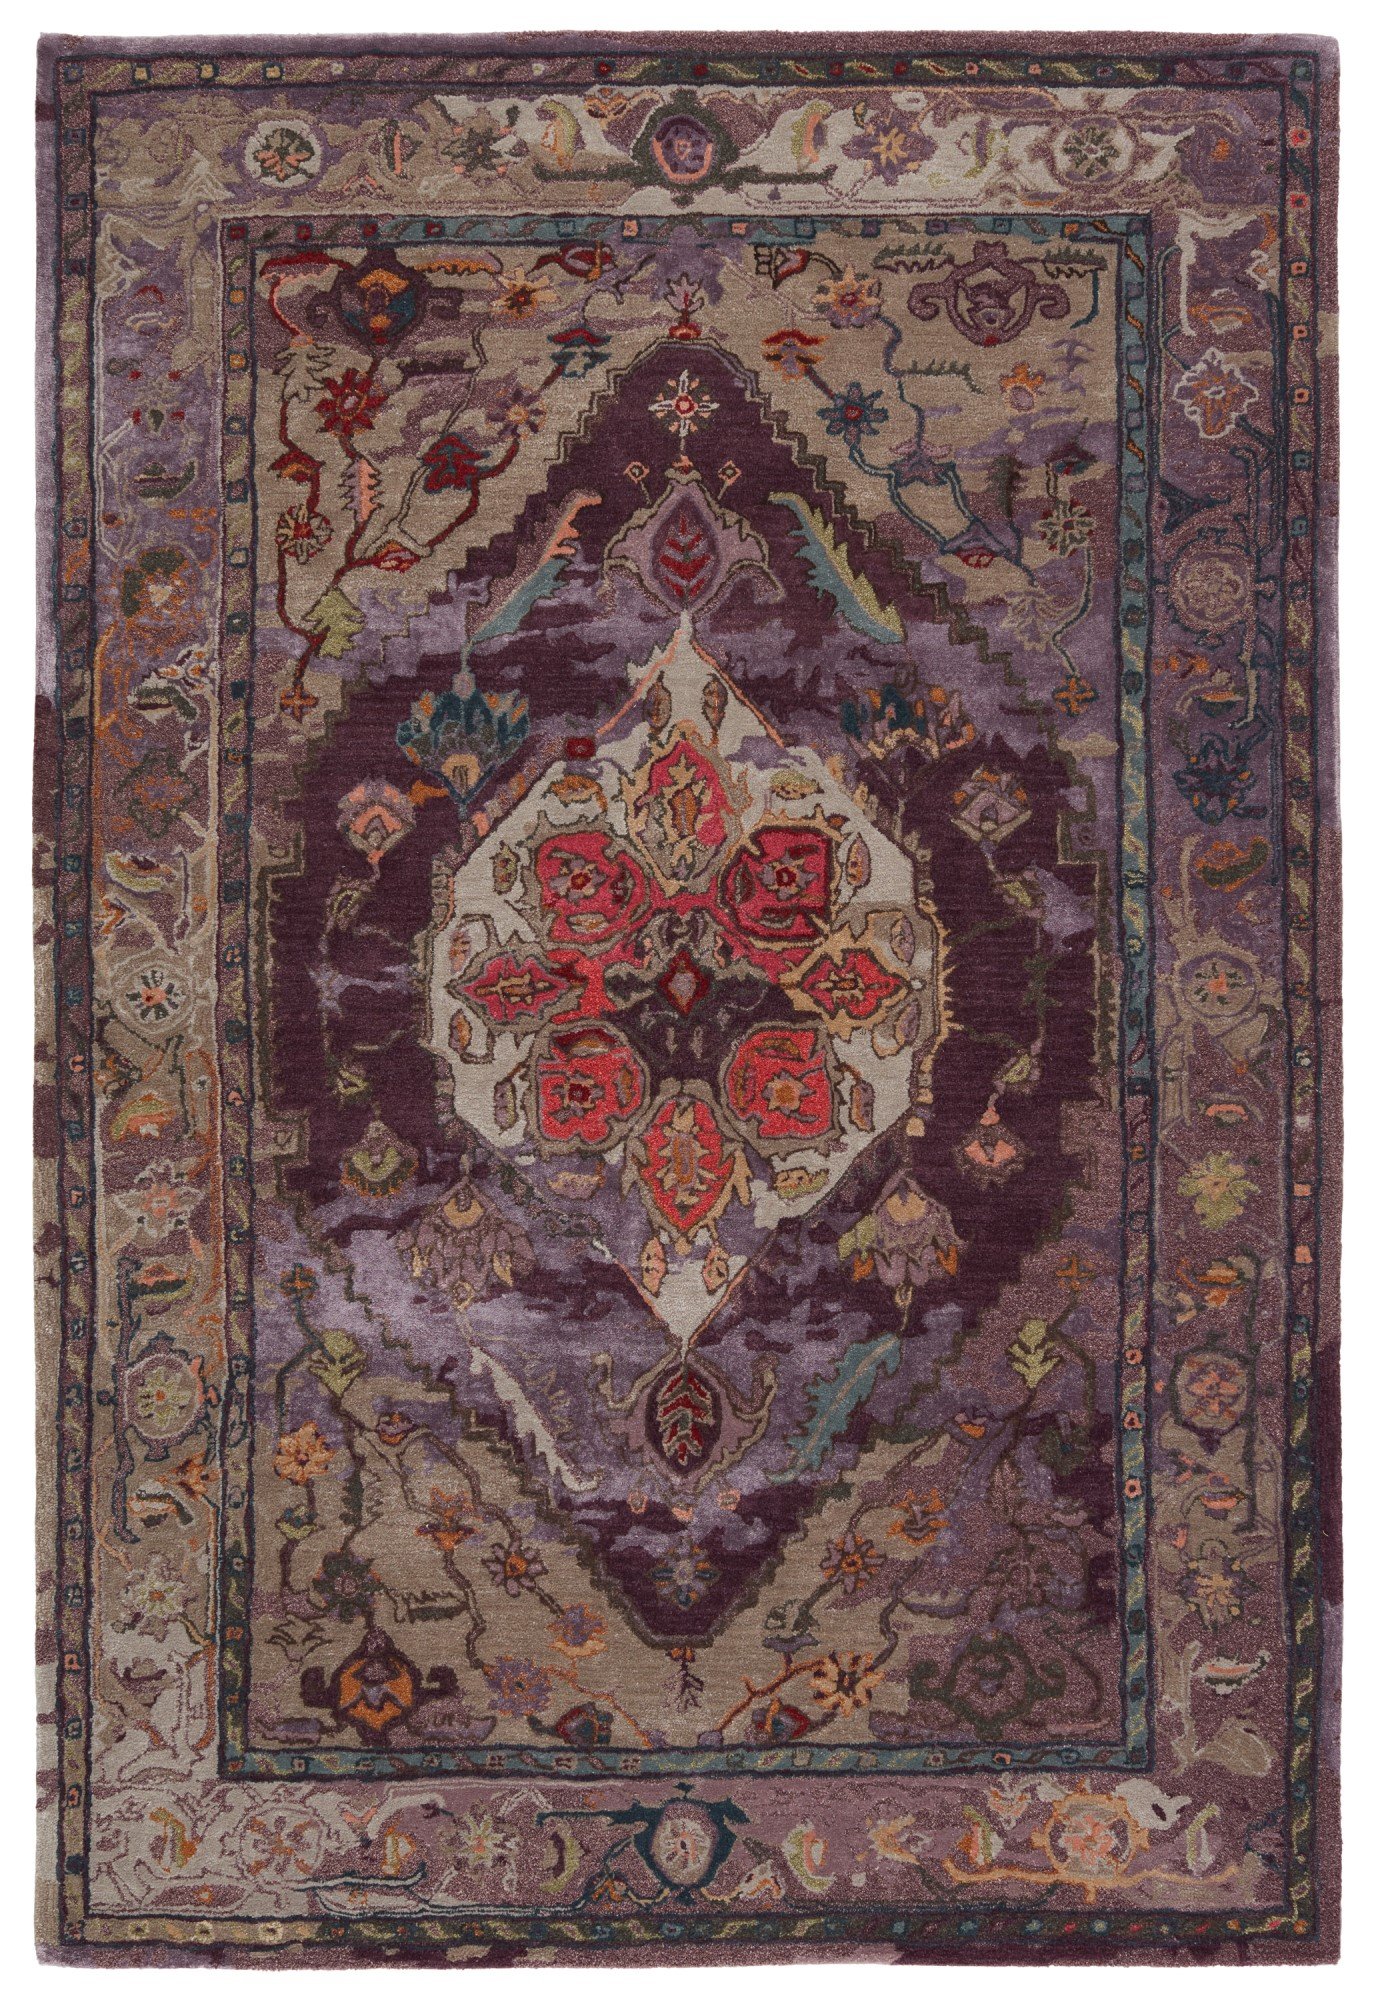 CHEAP & QUALITY CARPETS IVANO purple Bedroom width 3m 4m 5m Large RUG ANY SIZE 